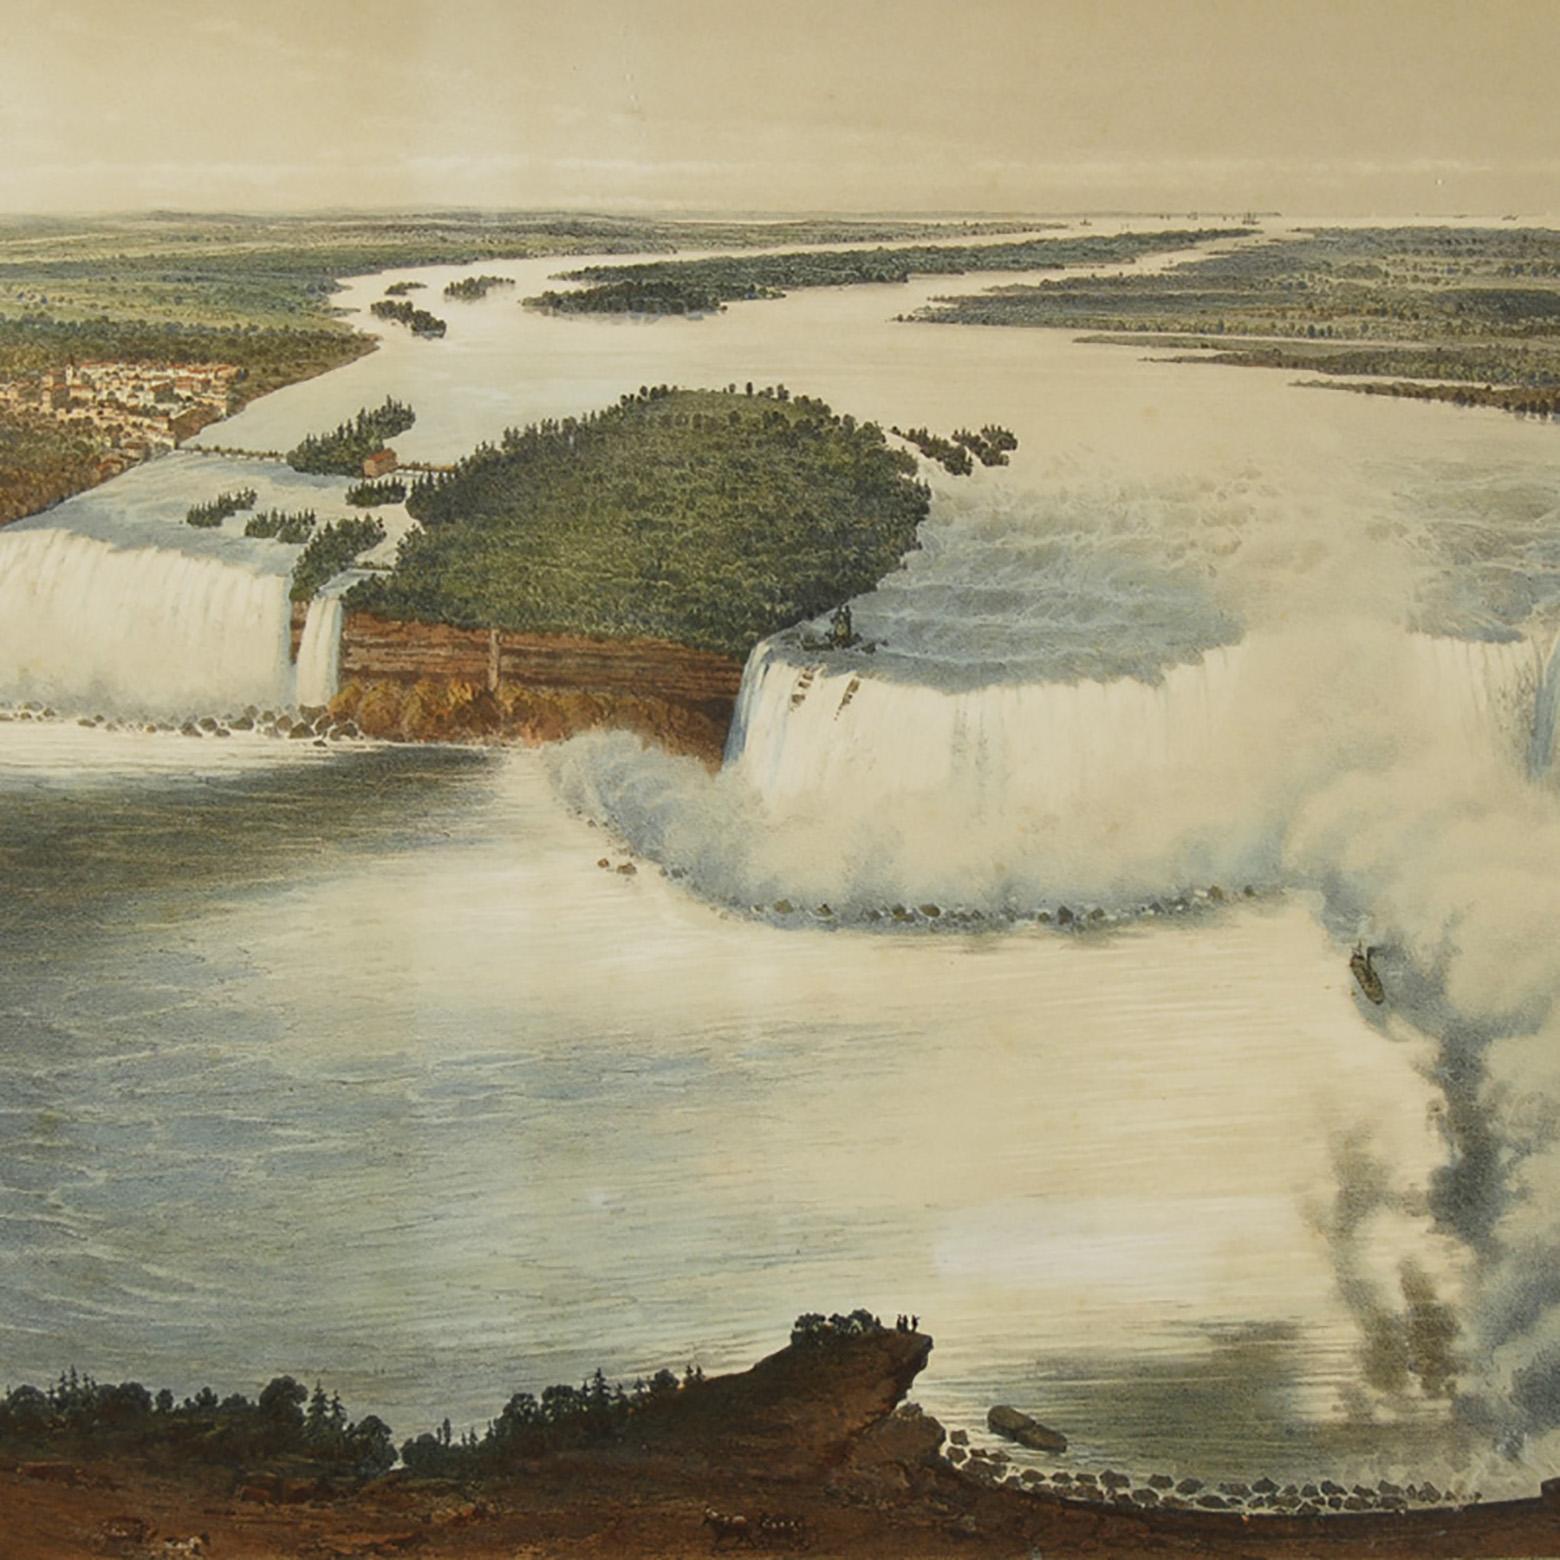 Eugène Ciceri (French, 1813–1890) Titled: Vue Generale du Niagara, after John Bachman's 1851 birds eye view of Niagara Falls; hand colored lithograph, published sometime after 1865 by E. Ciceri, plate No. 71.
Dimensions: 16 3/4 x 24 in.; Framed: 21